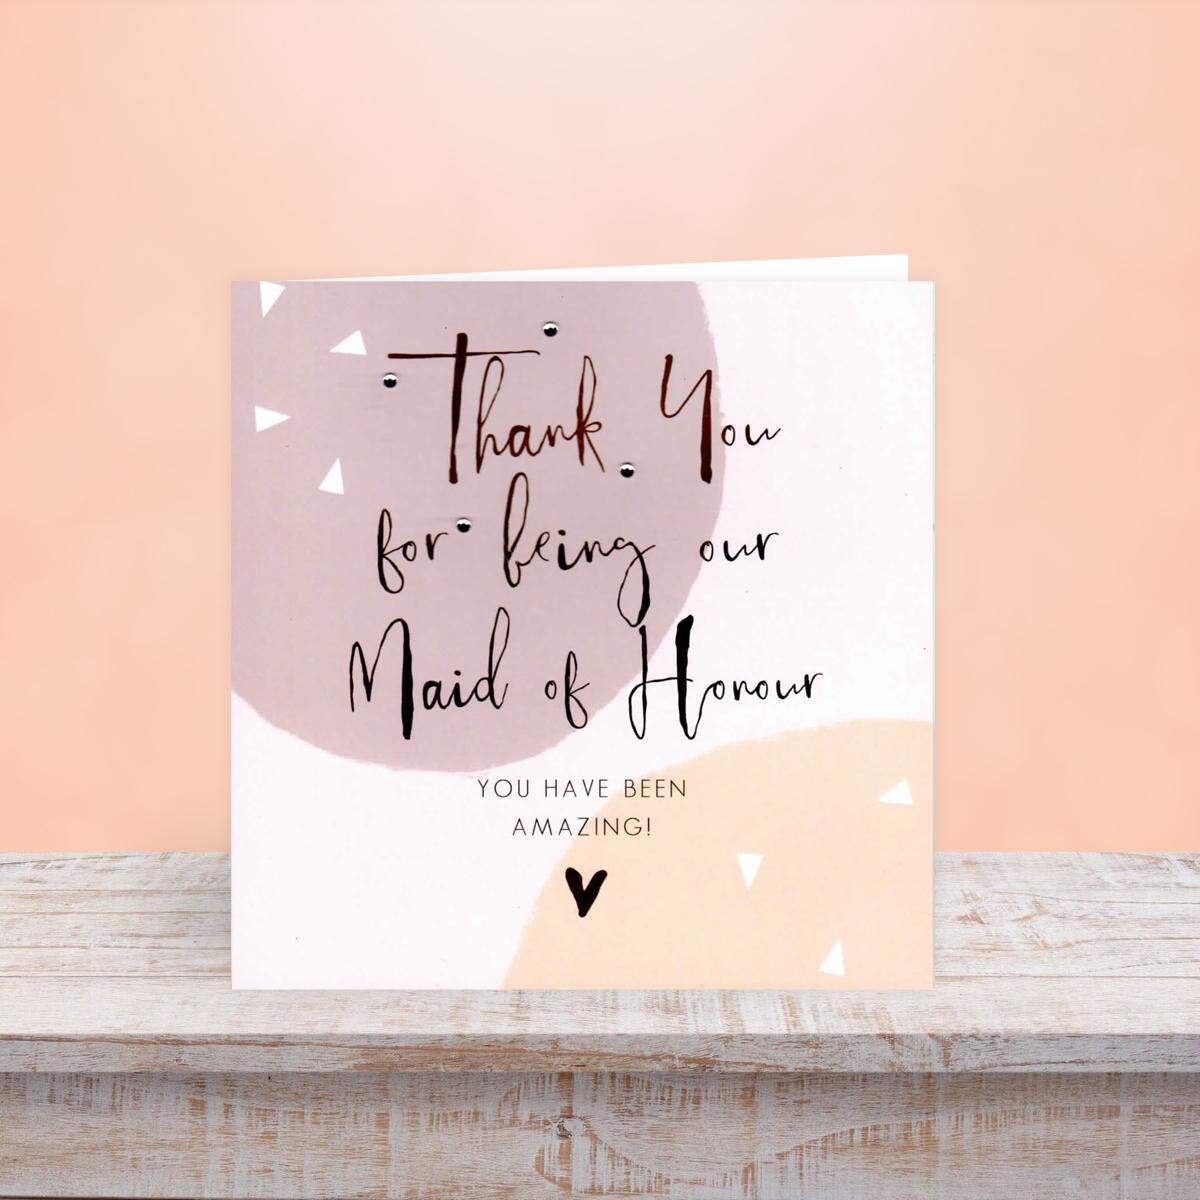 Maid Of Honour Wedding Day Thank You Card Displayed On A Wooden Shelf